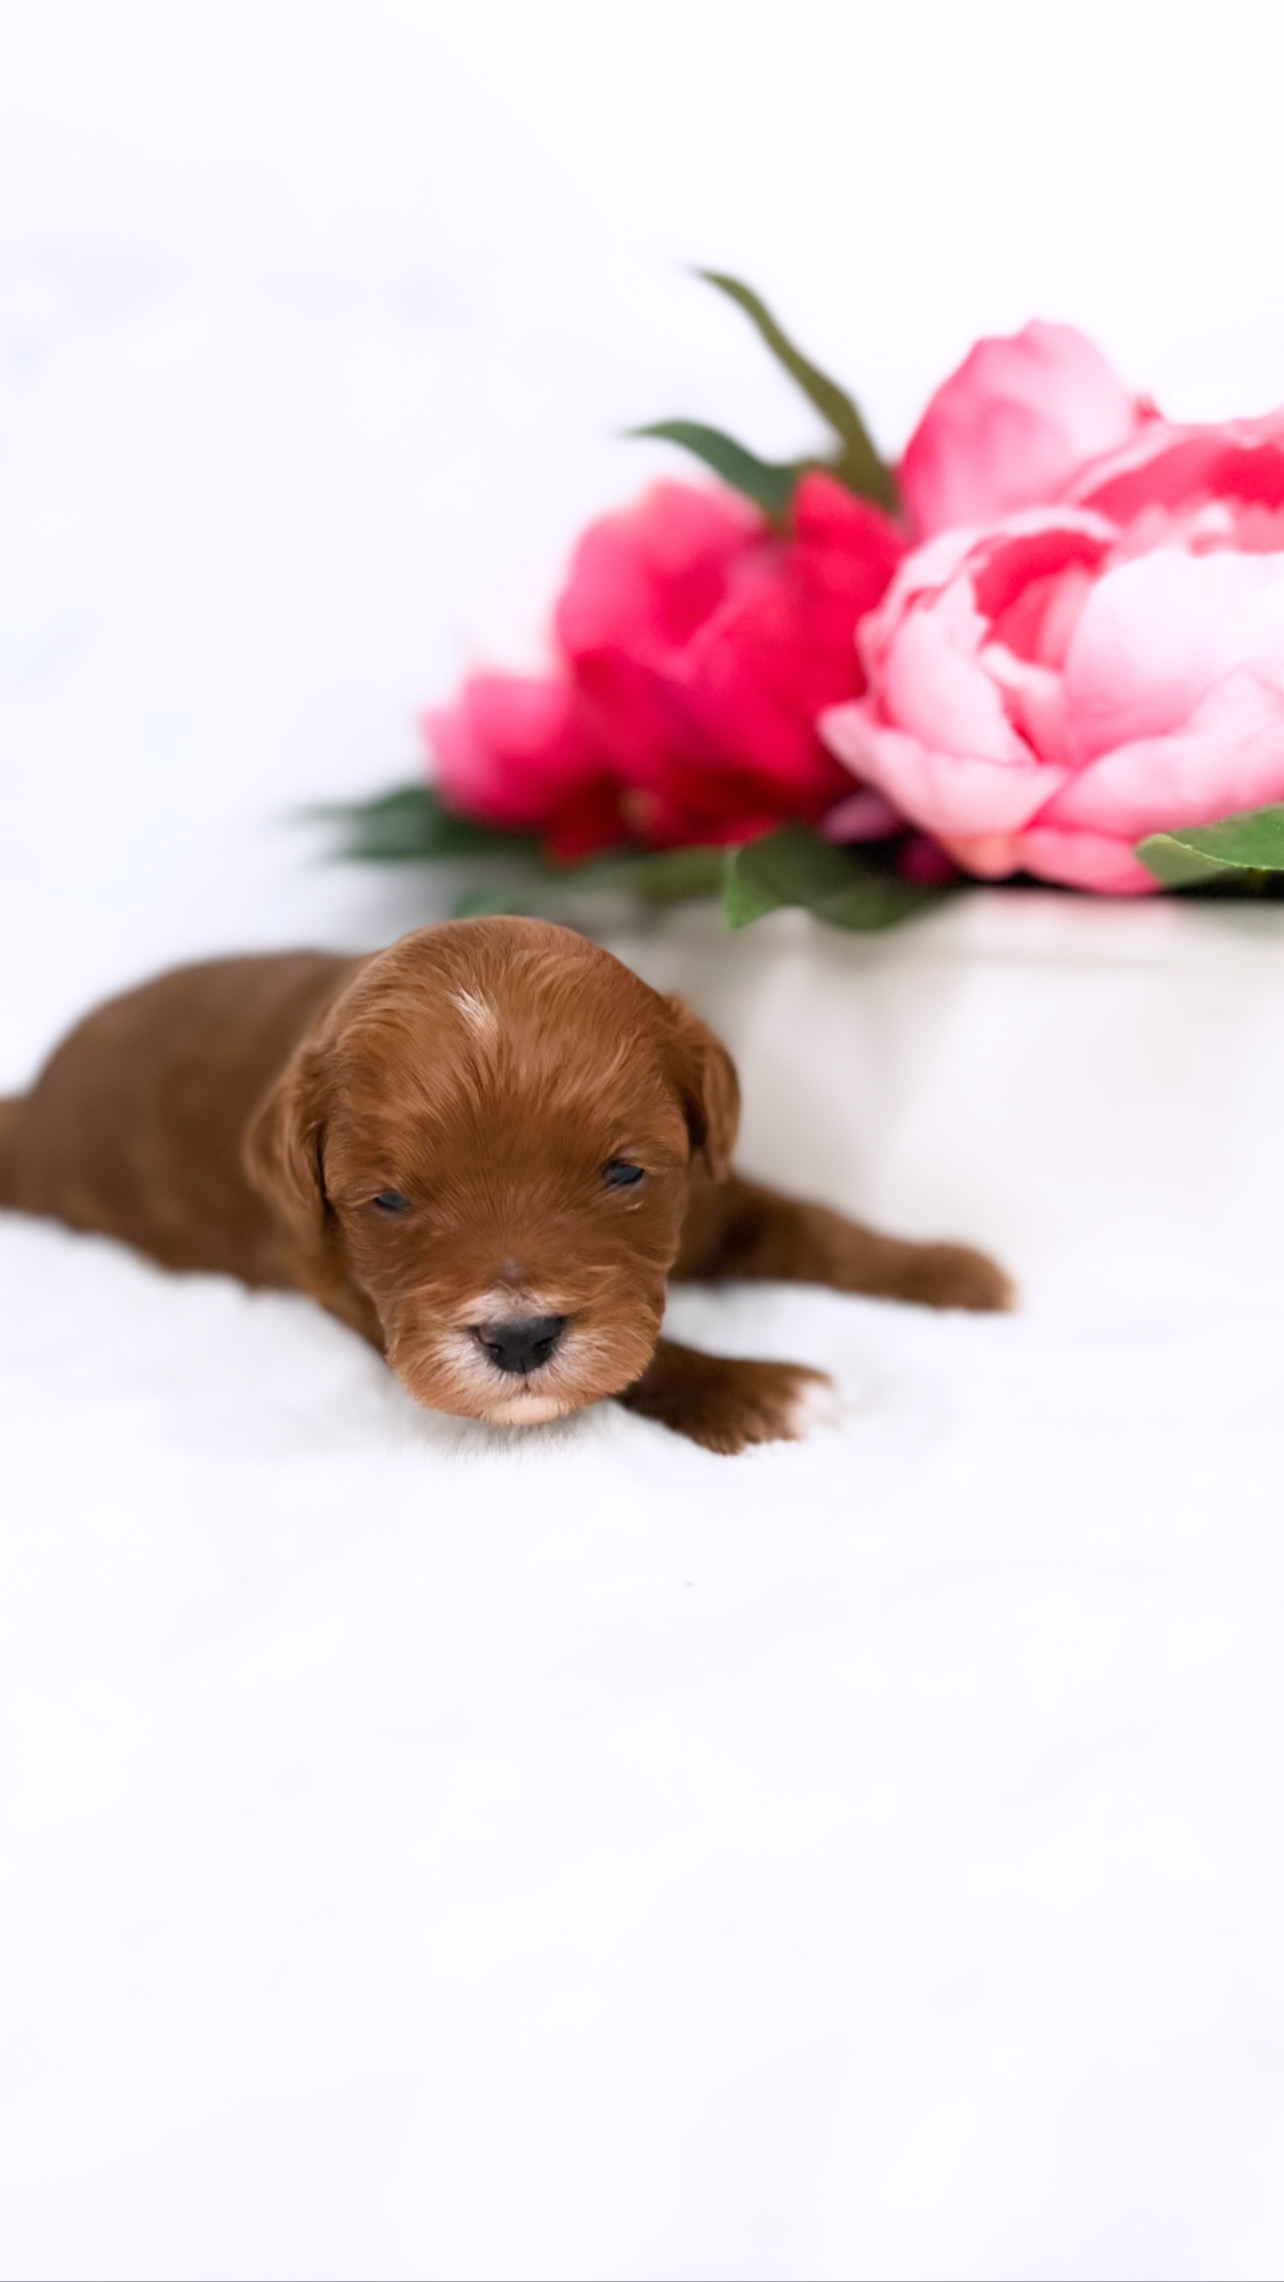 A small brown female teacup Cavapoo peacefully rests on a white surface adorned with delicate pink flowers.